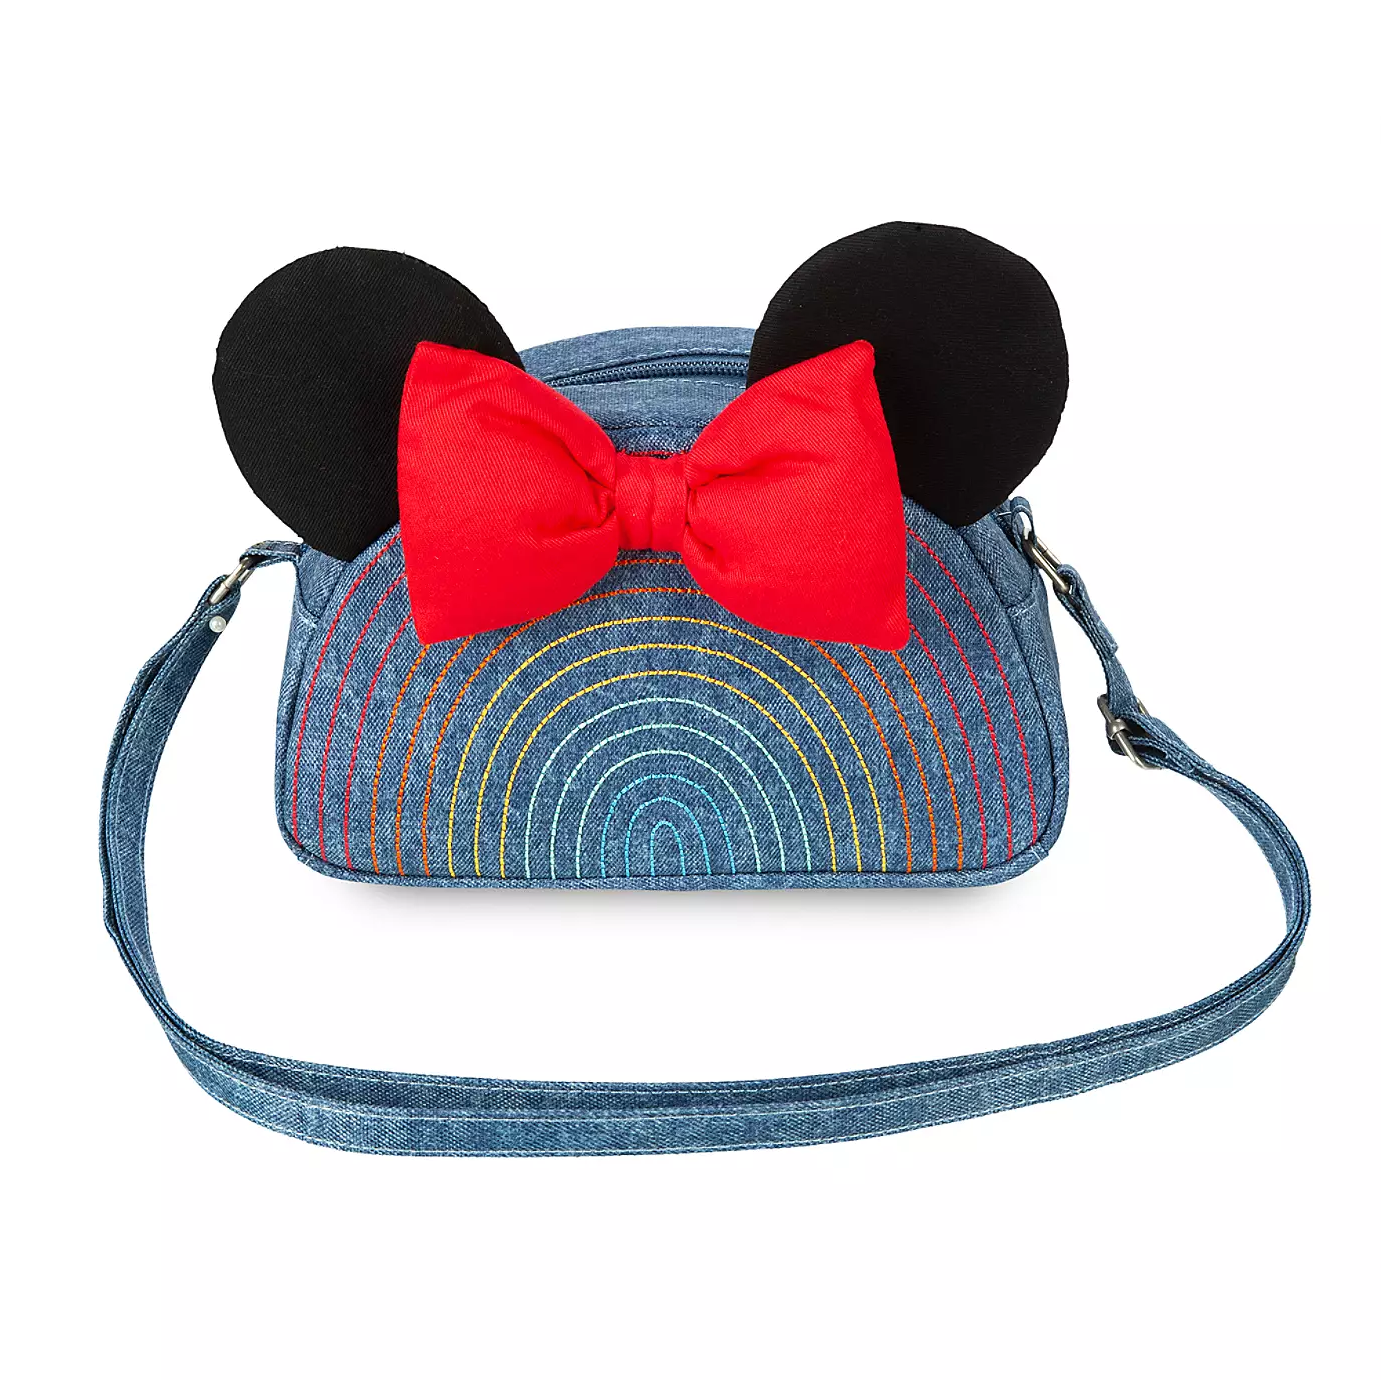 Disney Fashion Minnie Mouse Most Wanted Icon, Shopper